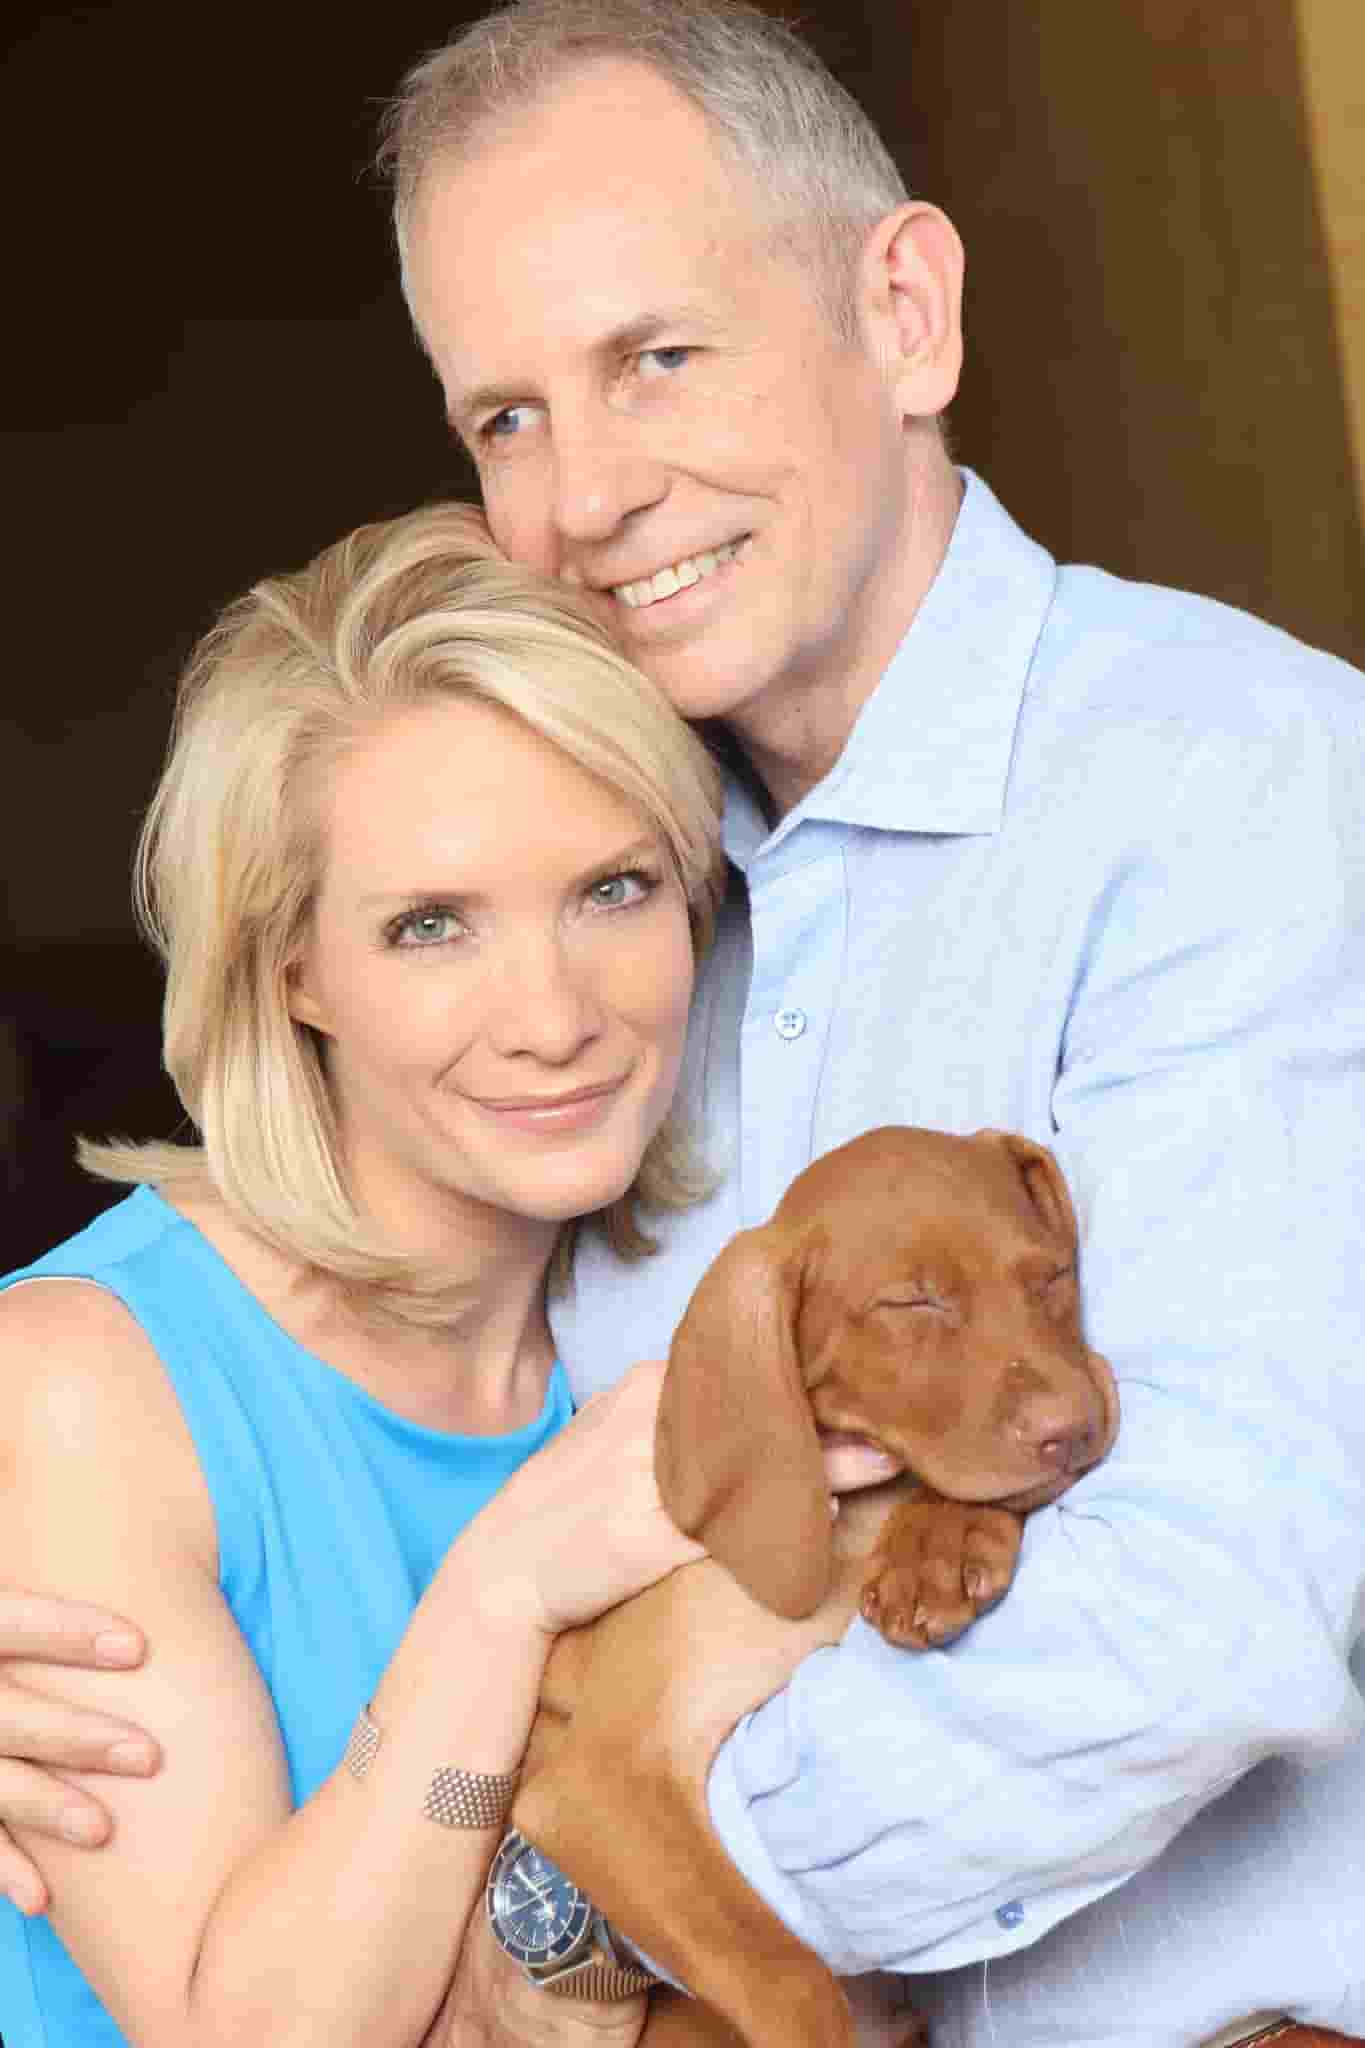 Peter McMahon with her with Dana Perino and their pet Jasper together when Jasper was just a little puppy.